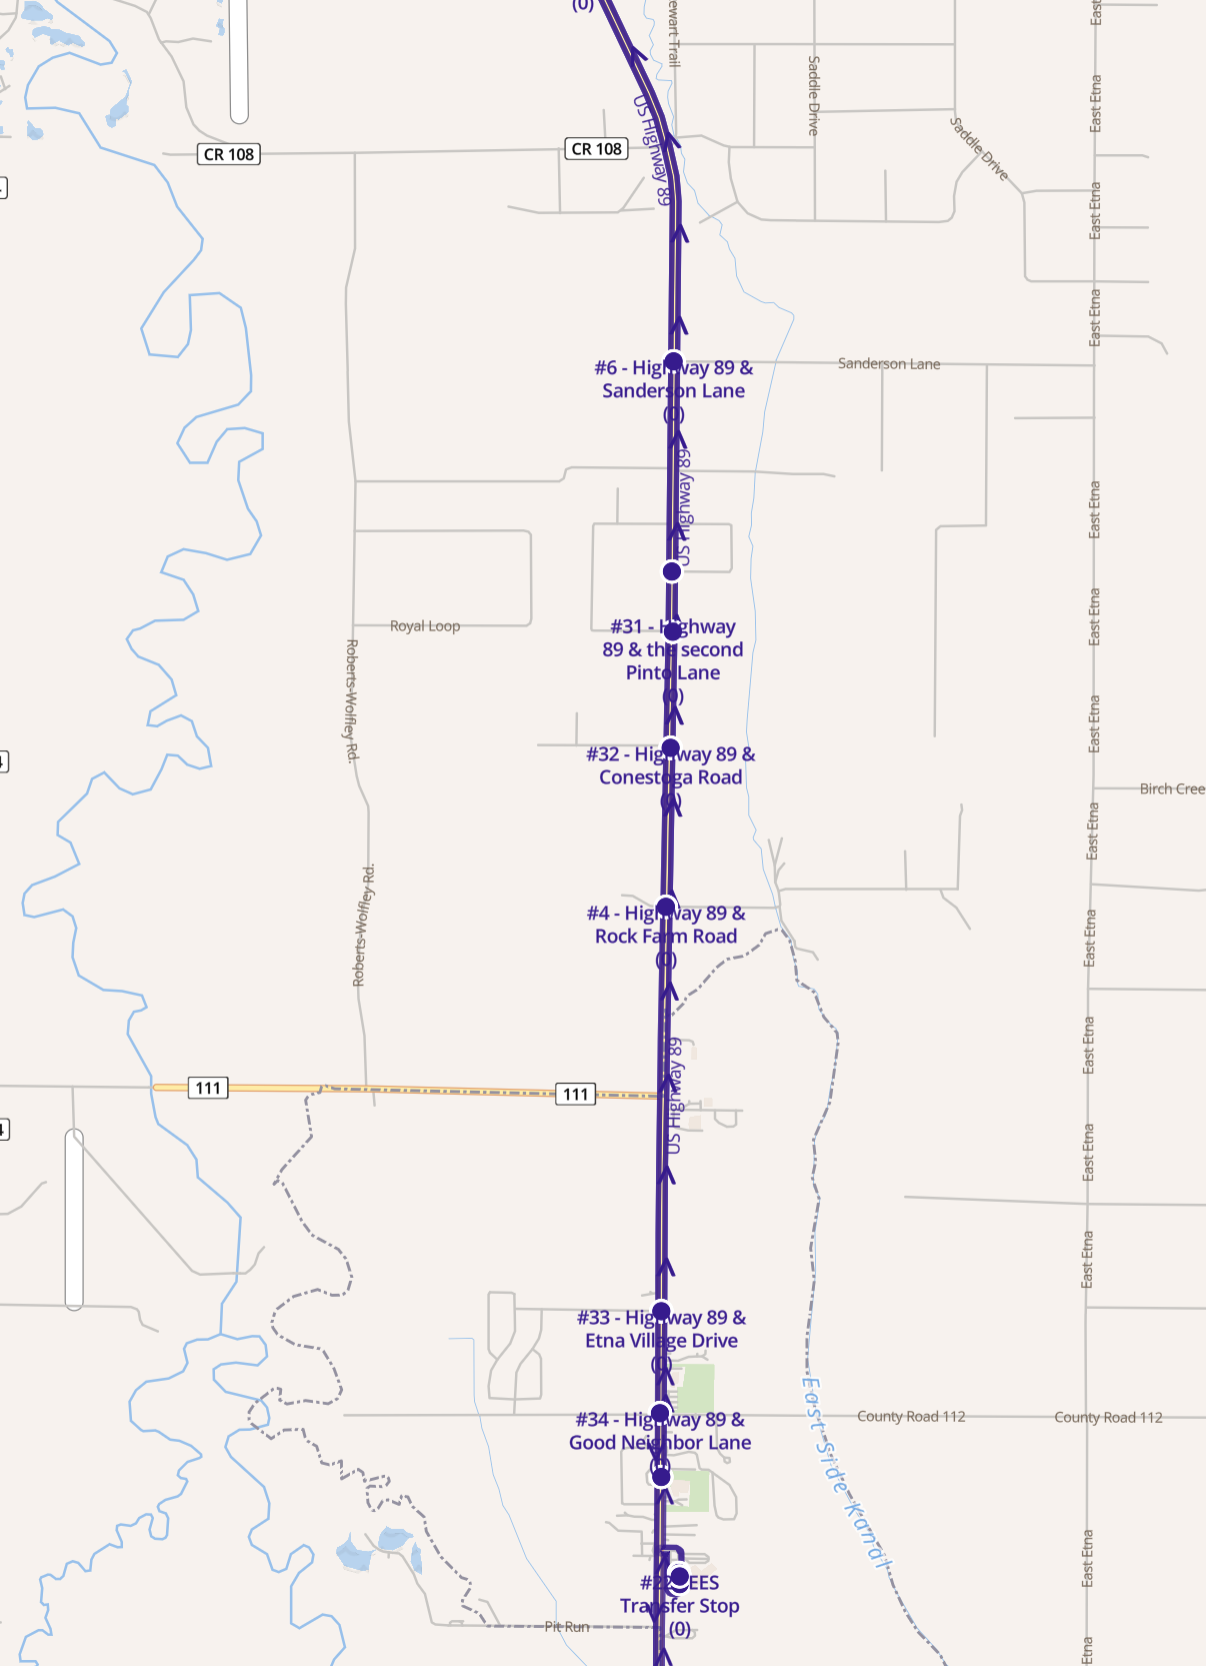 map of route 4 bottom half